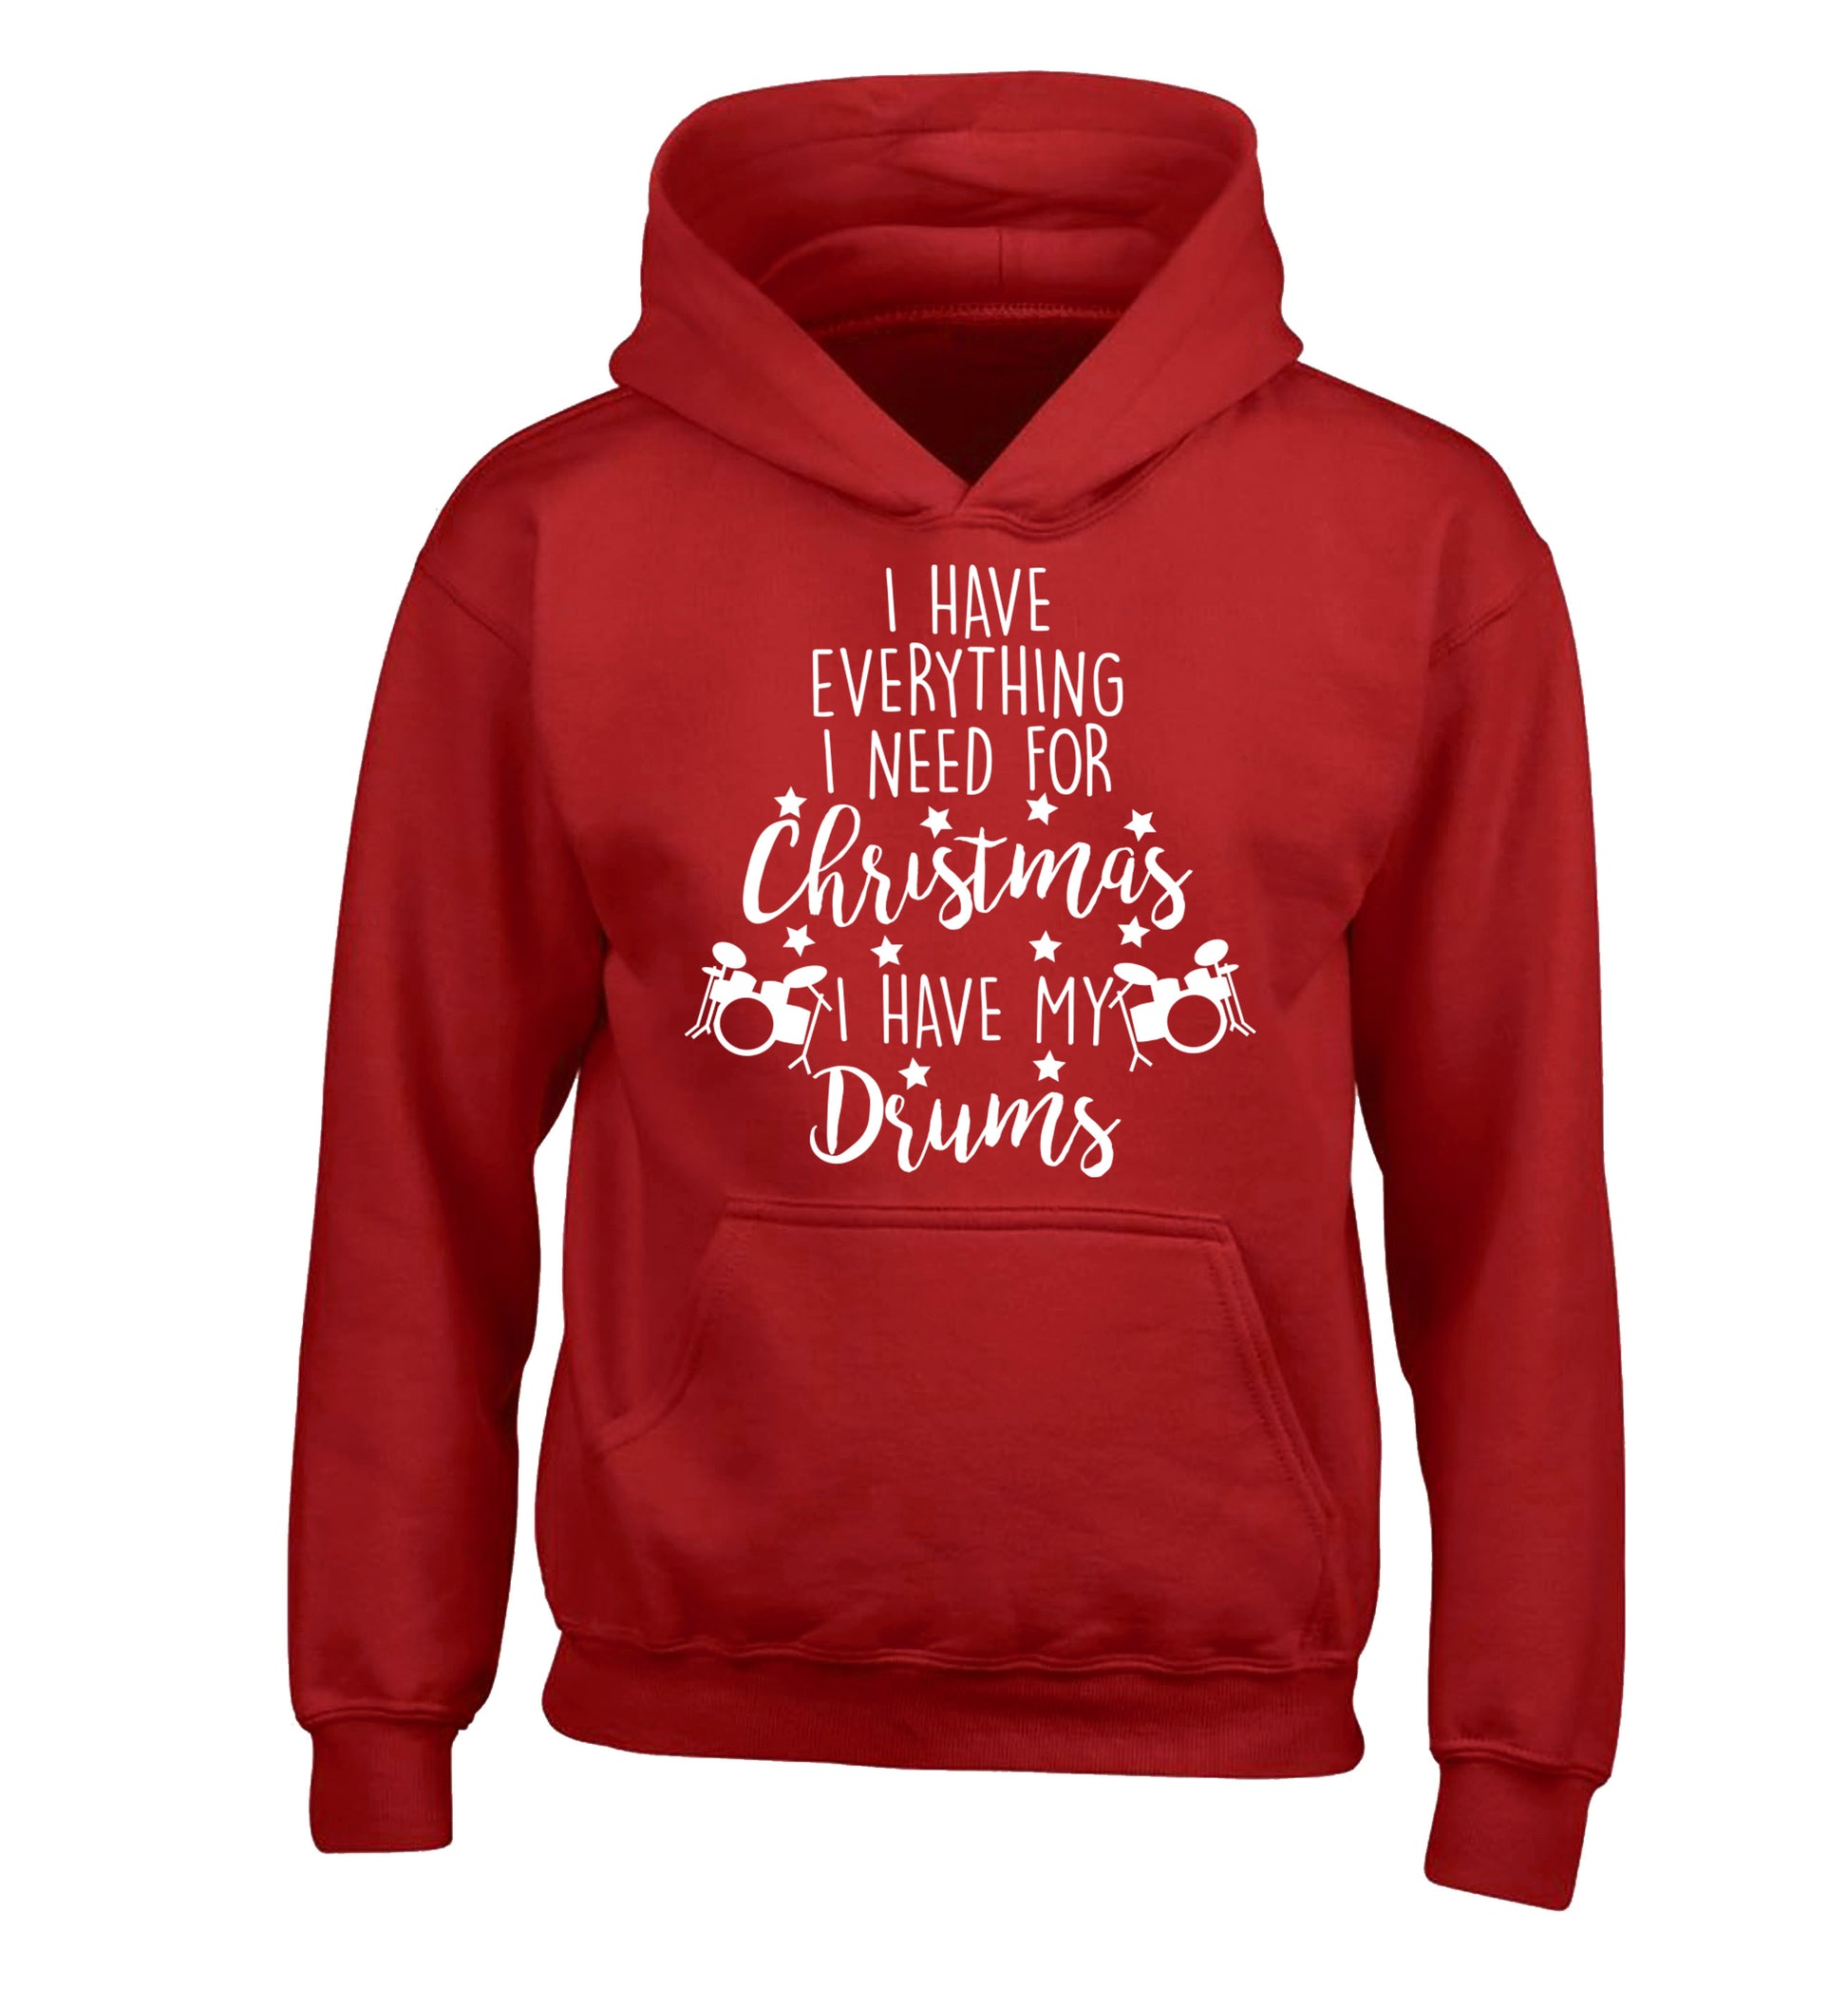 I have everything I need for Christmas I have my drums! children's red hoodie 12-14 Years